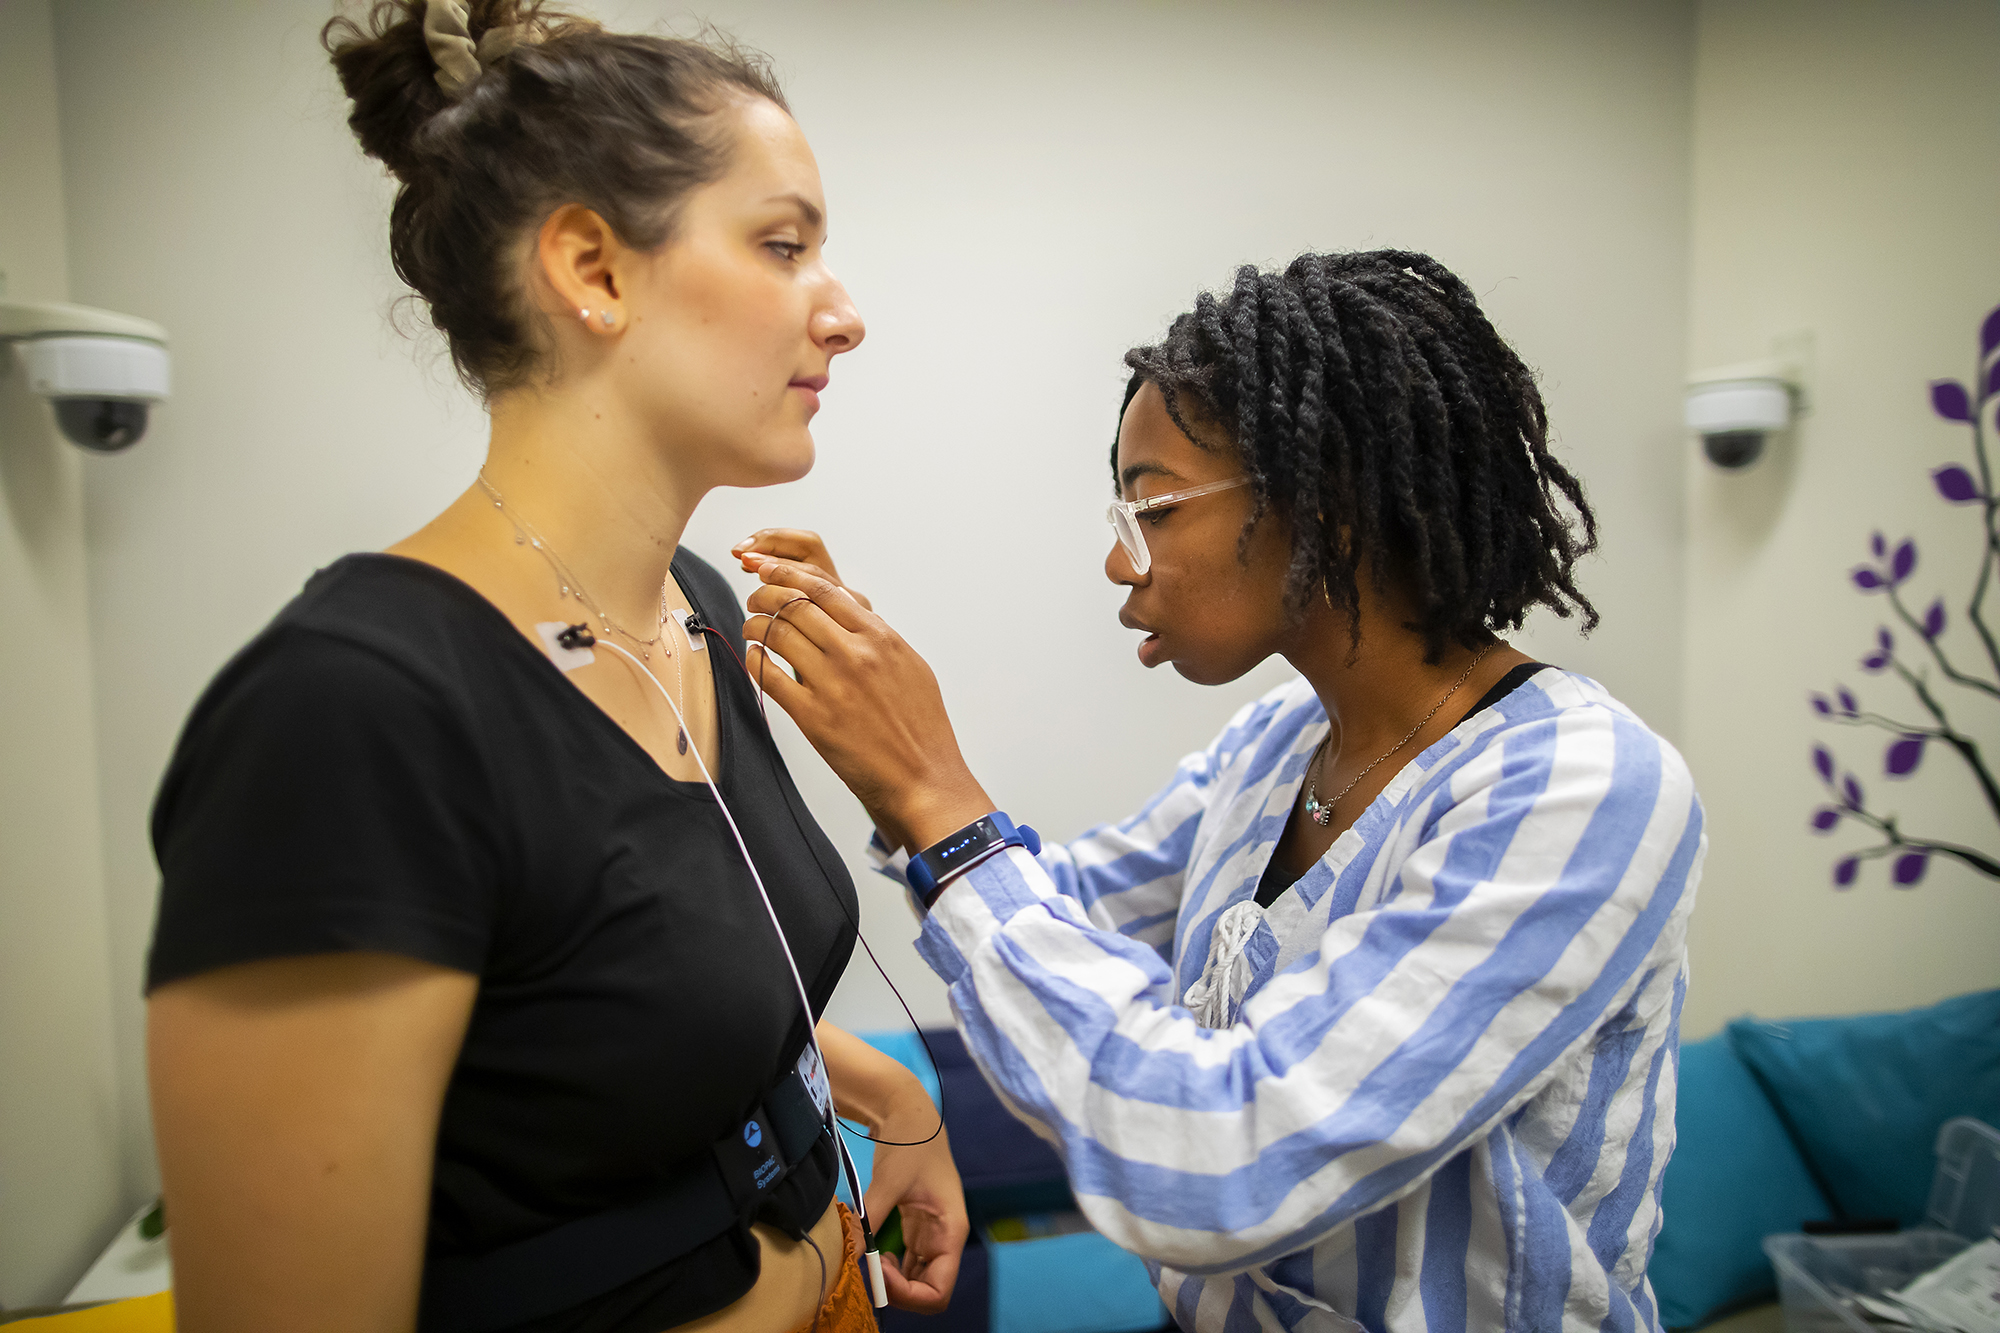 A young woman (right) places electrodes on another young woman's neck (left).